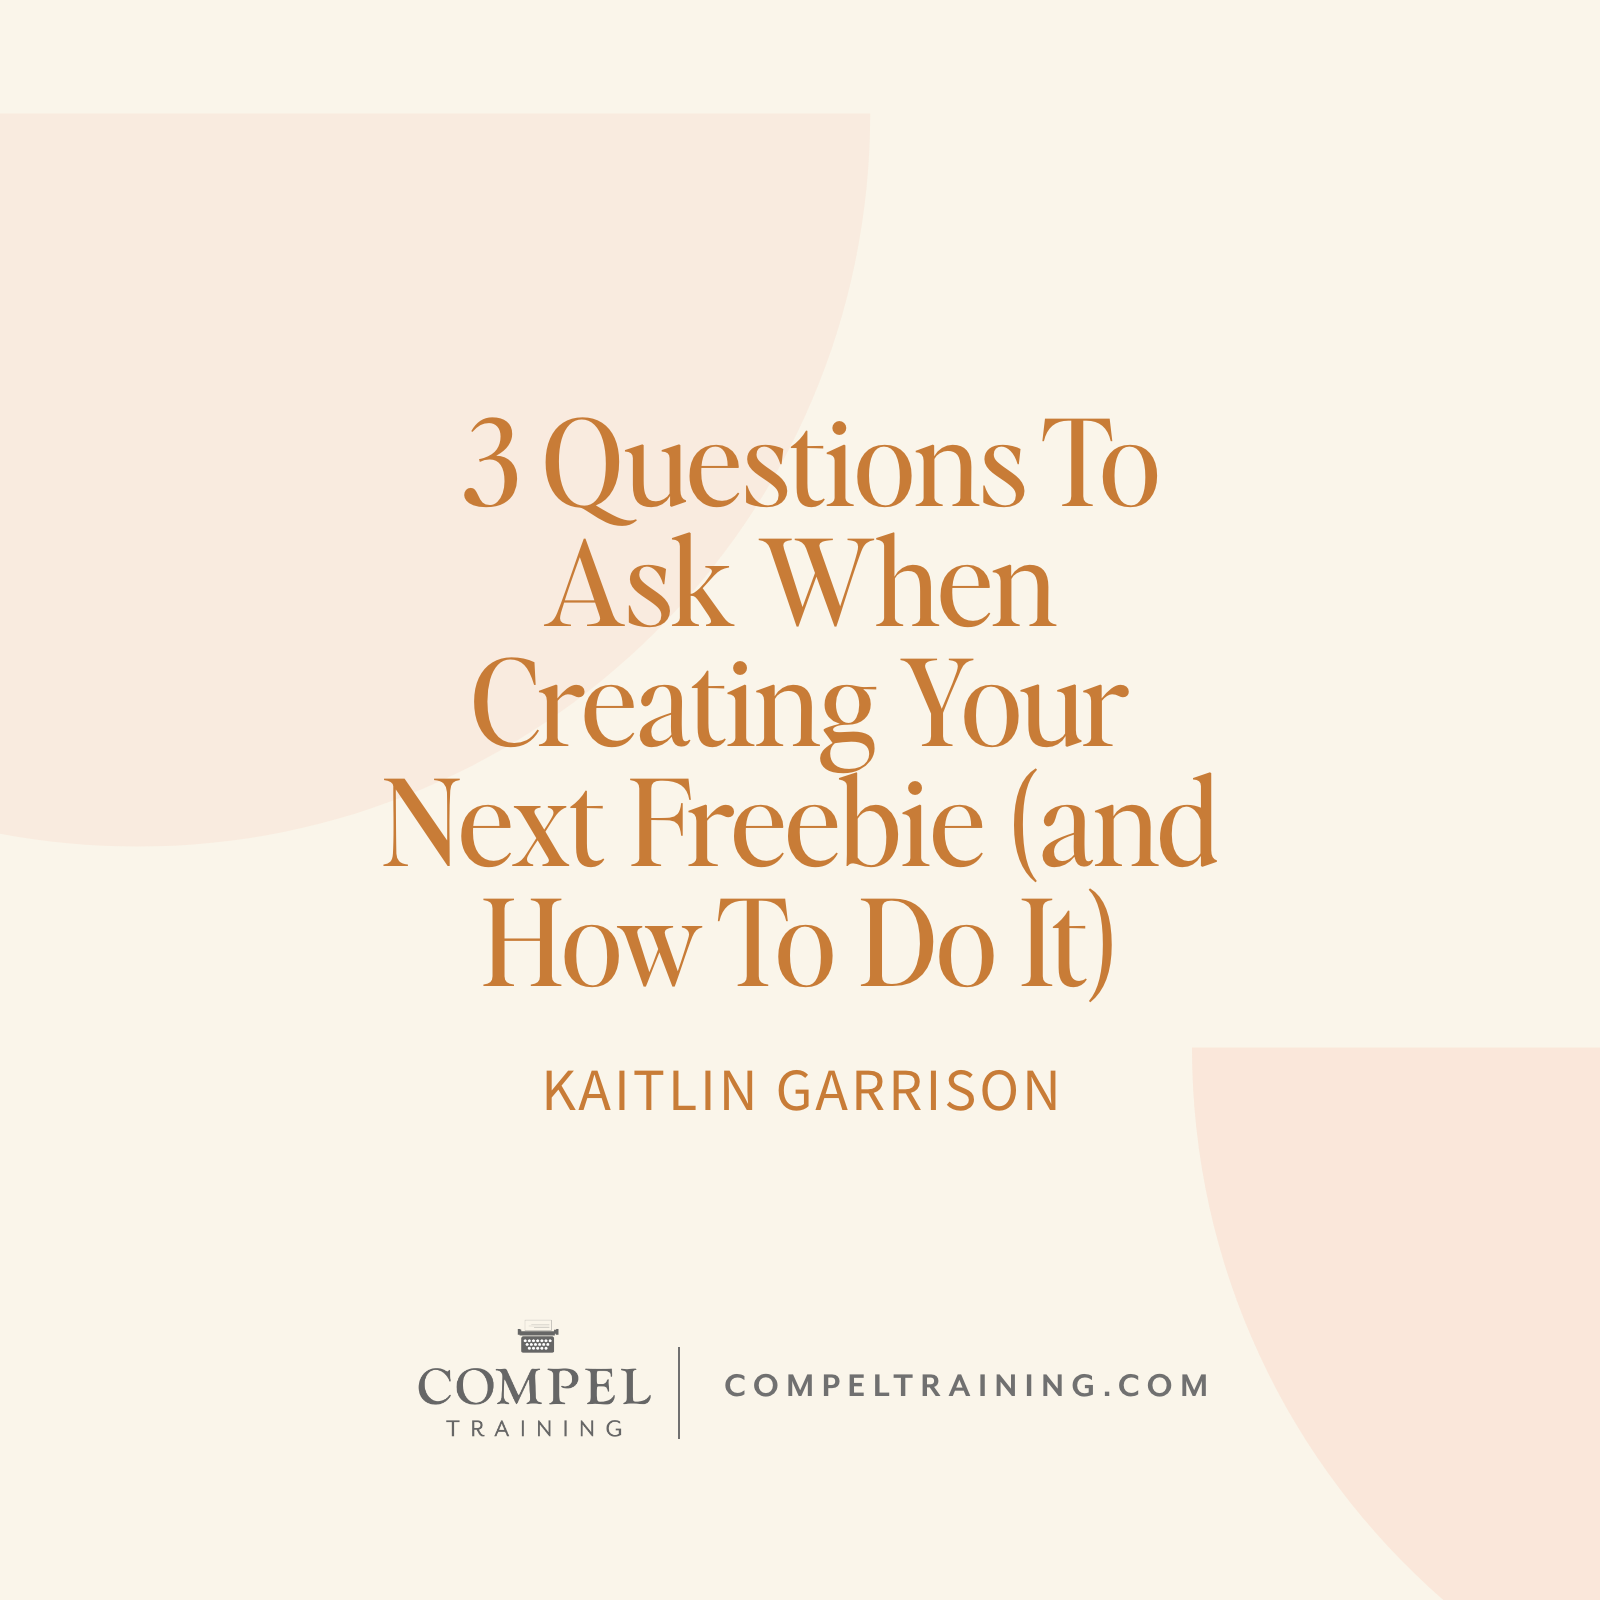 What are freebies, and how do we create them? If you have these questions, friends, then you can stop right here! Look no further because in this week’s blog post, we will learn how to make our own freebies, while also figuring out how to make the right ones to capture our target audience.